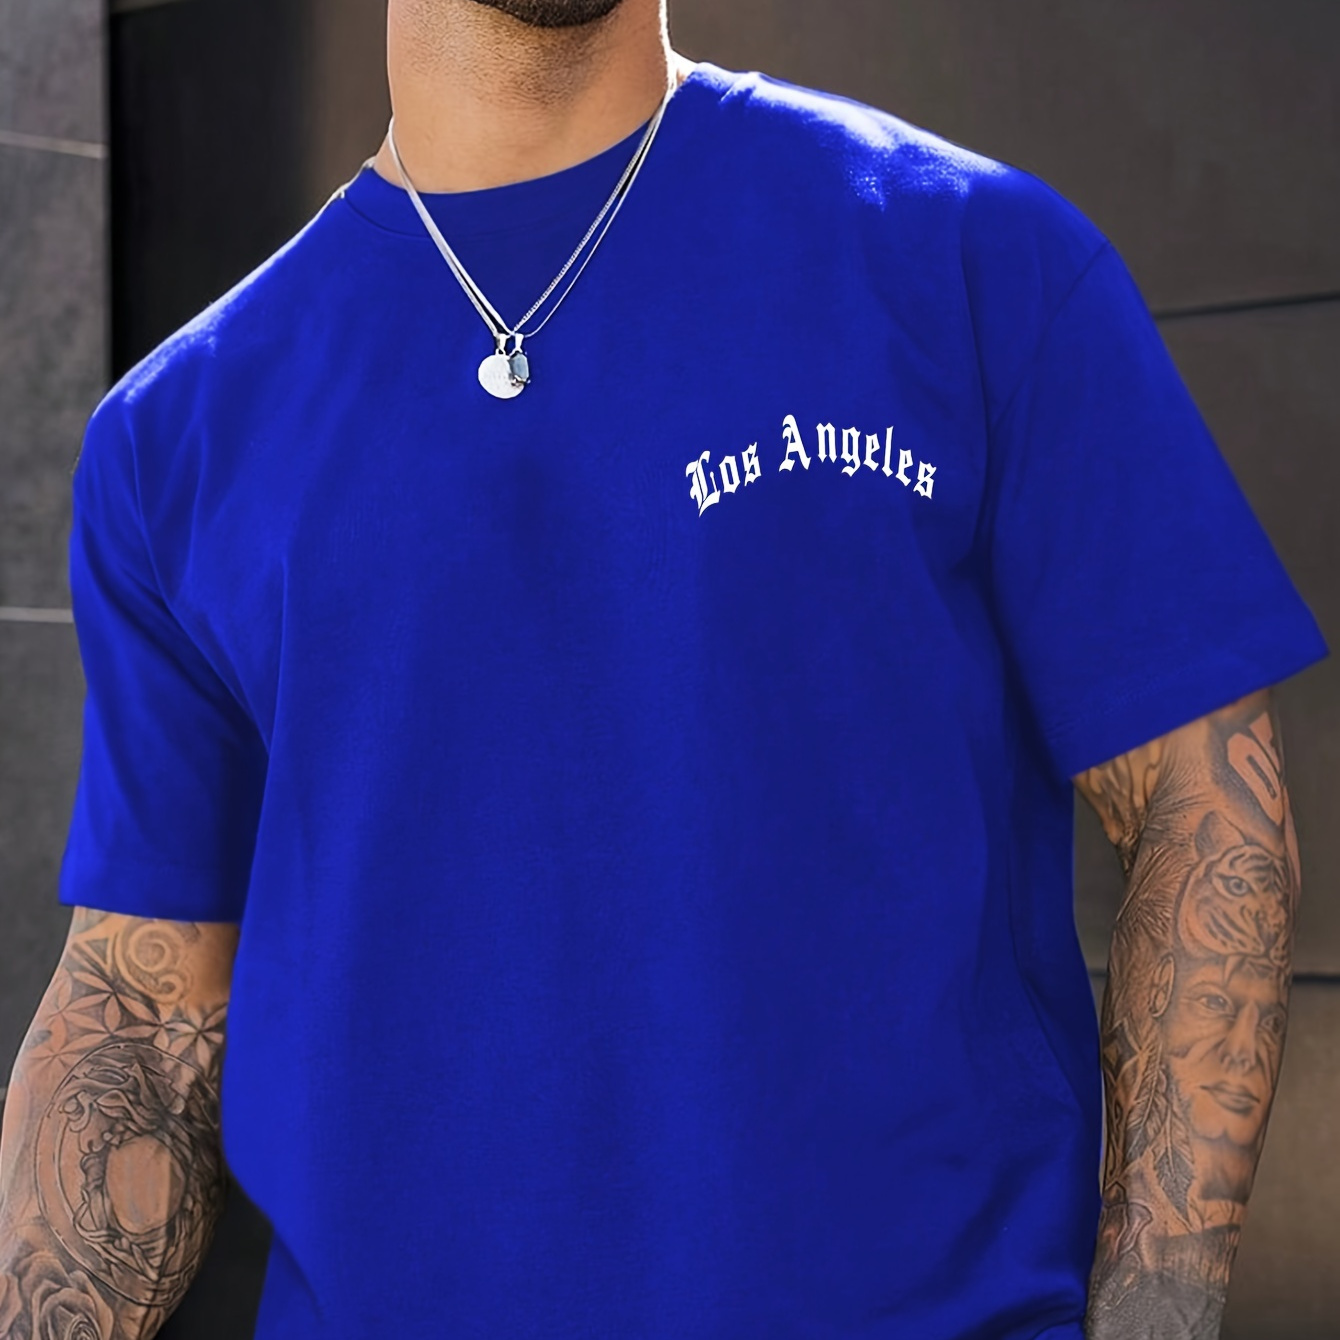 

' Los Angeles 'creative Print Men's Short Sleeve T-shirt, Casual Round Neck Top, Versatile And Comfortable Tee, Spring& Summer Collection